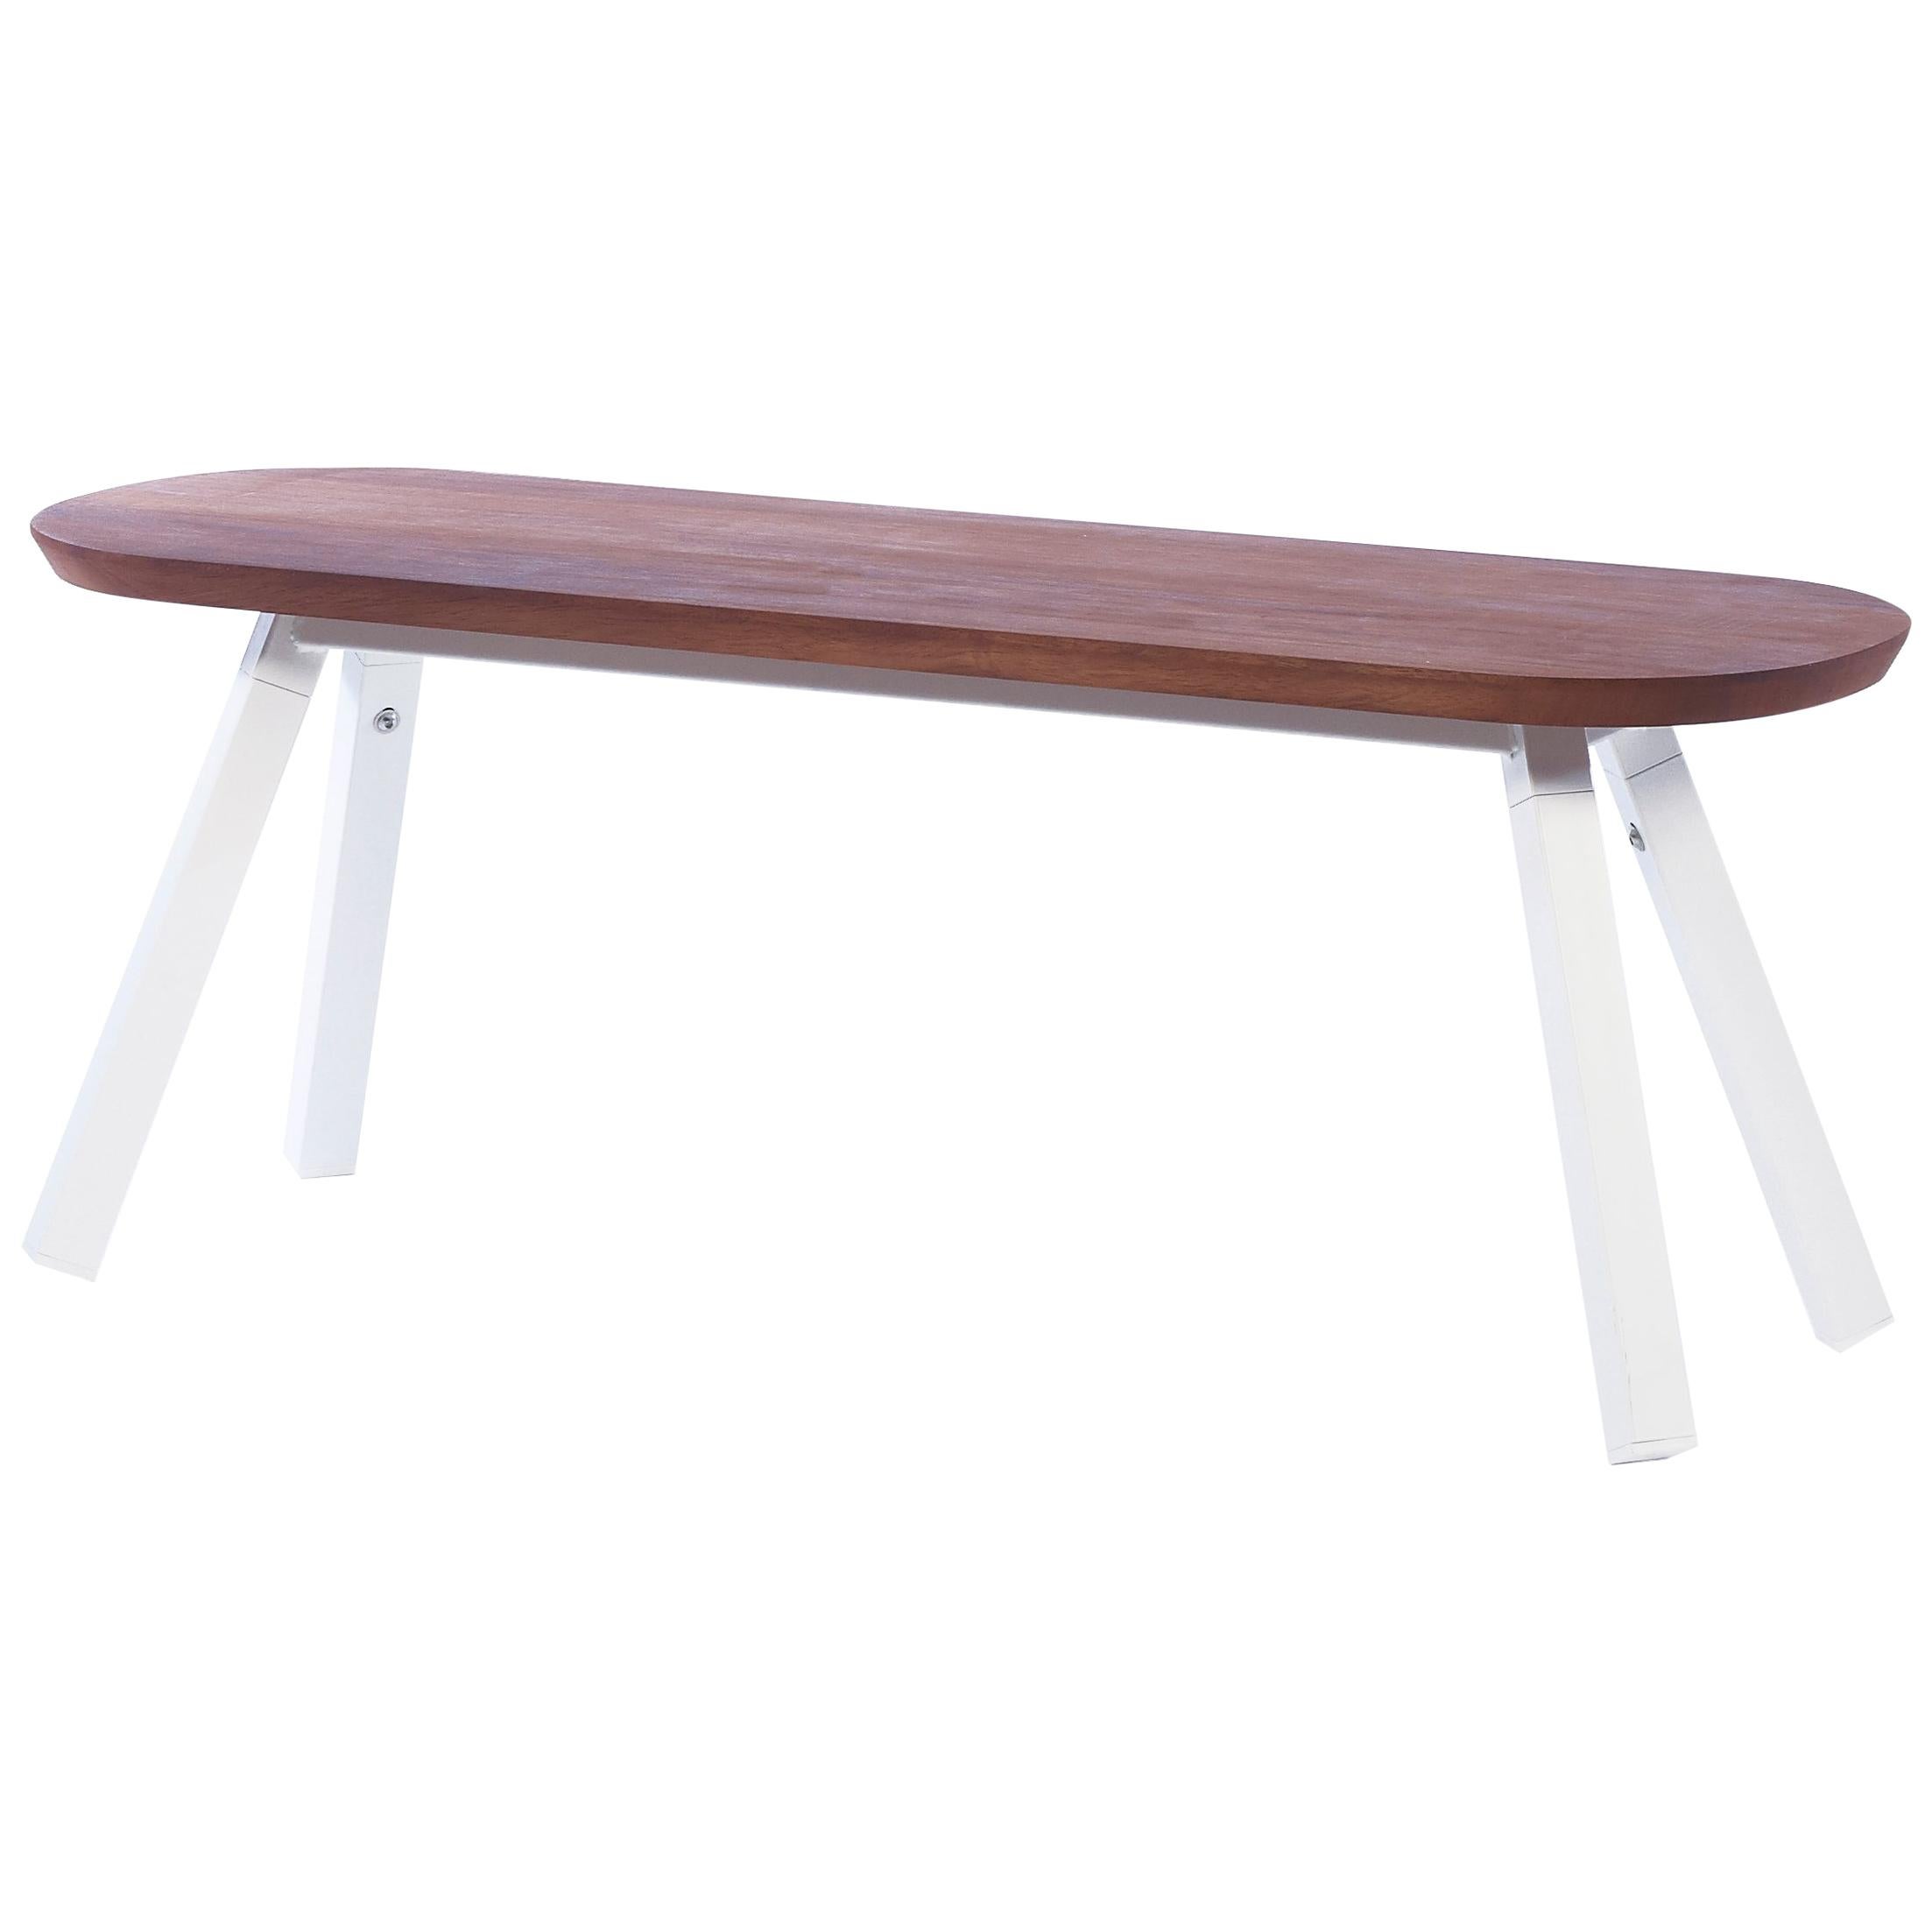 RS Barcelona You and Me 120 Bench in Iroko and White by A.P.O.